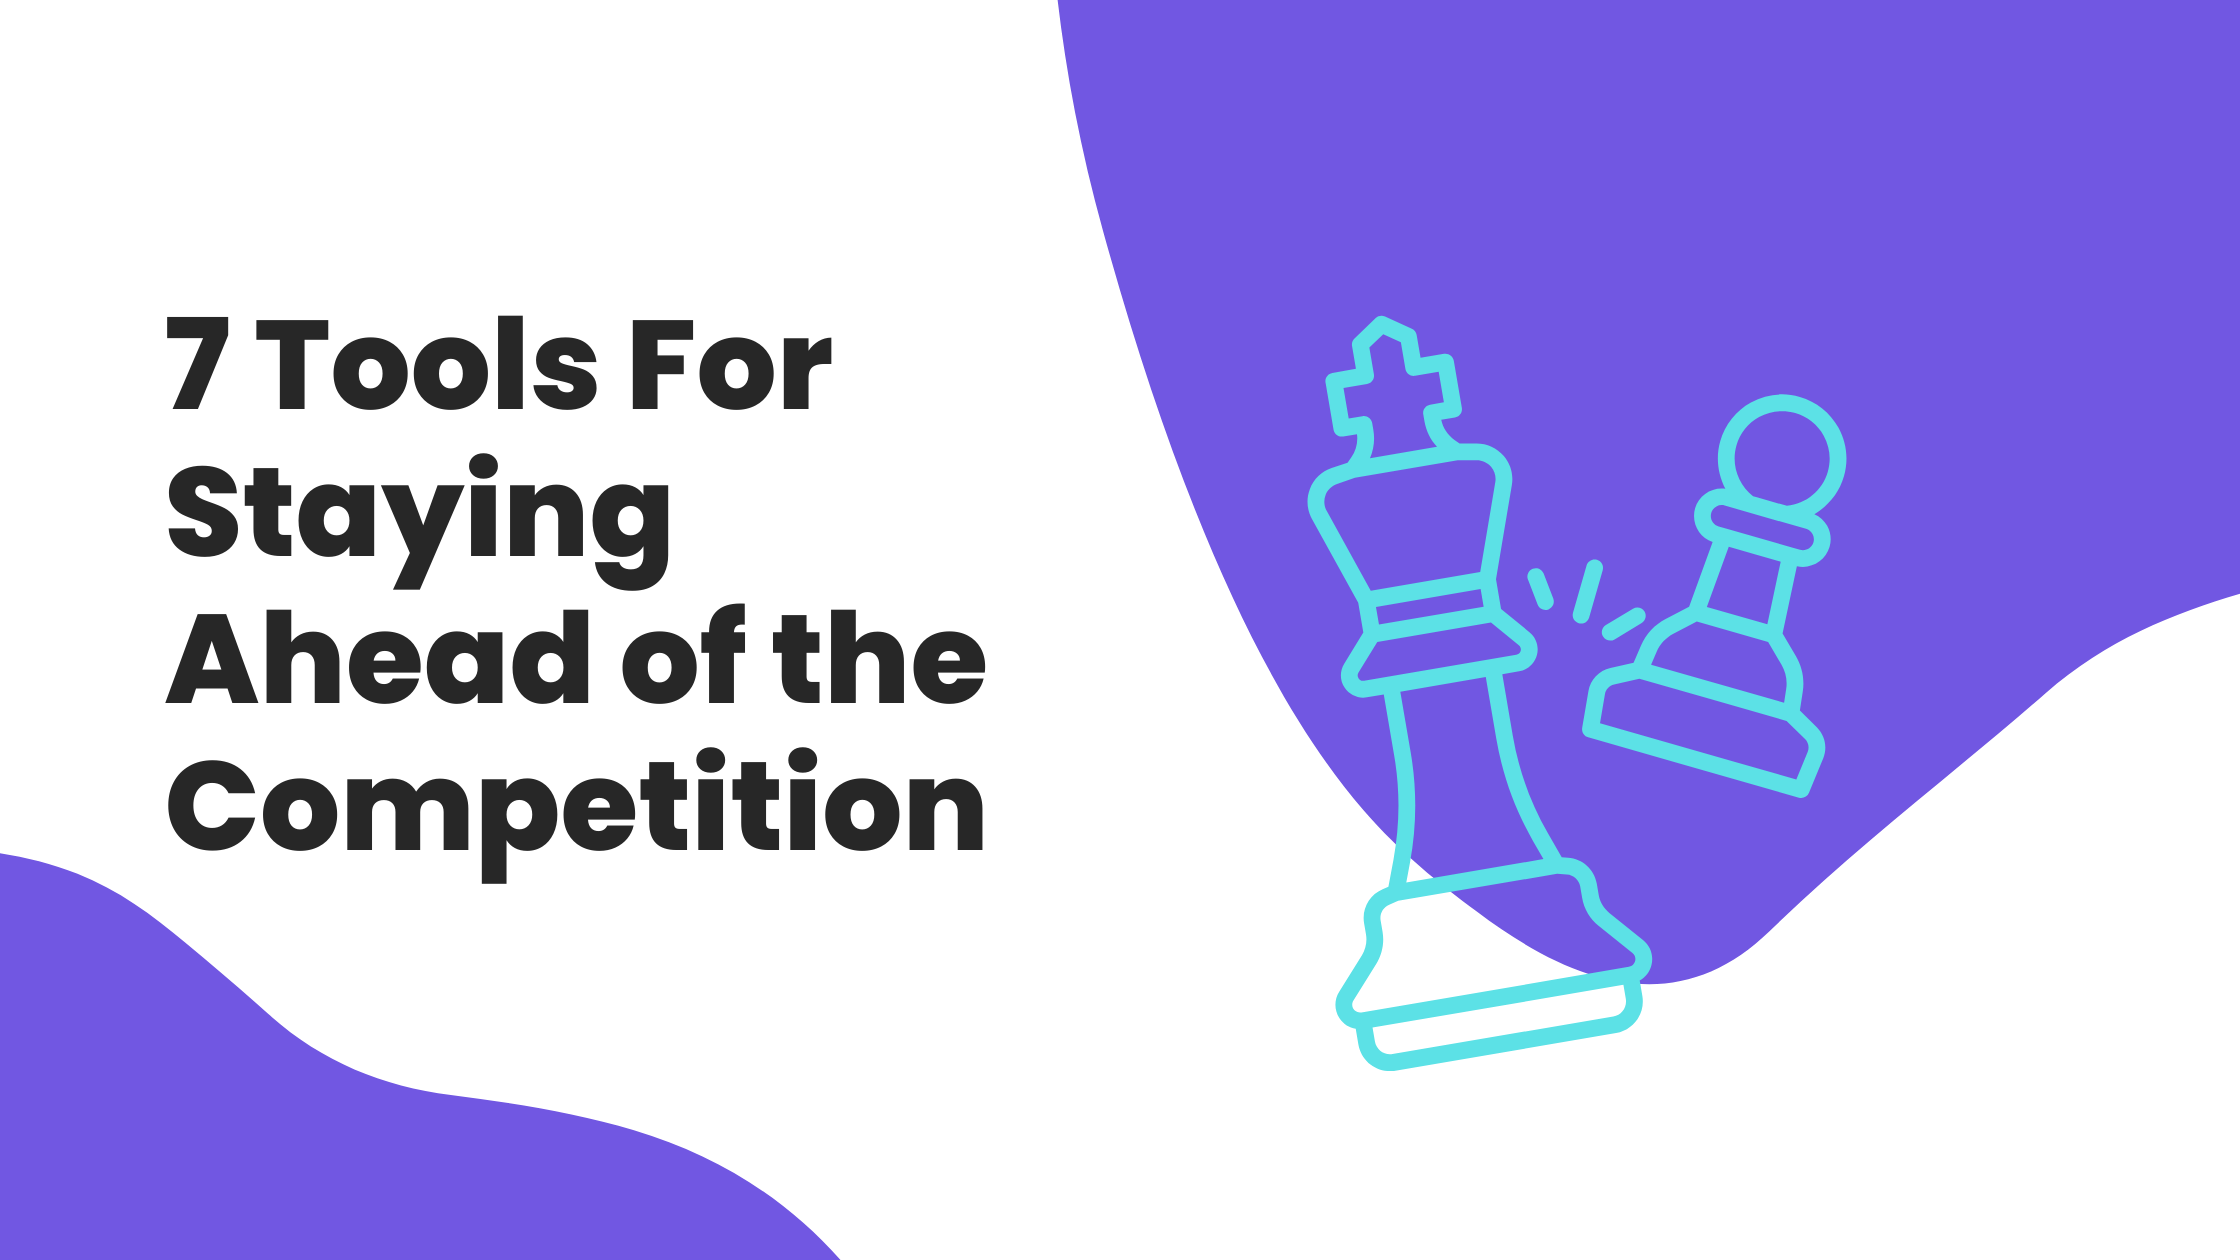 7 Tools For Staying Ahead of the Competition